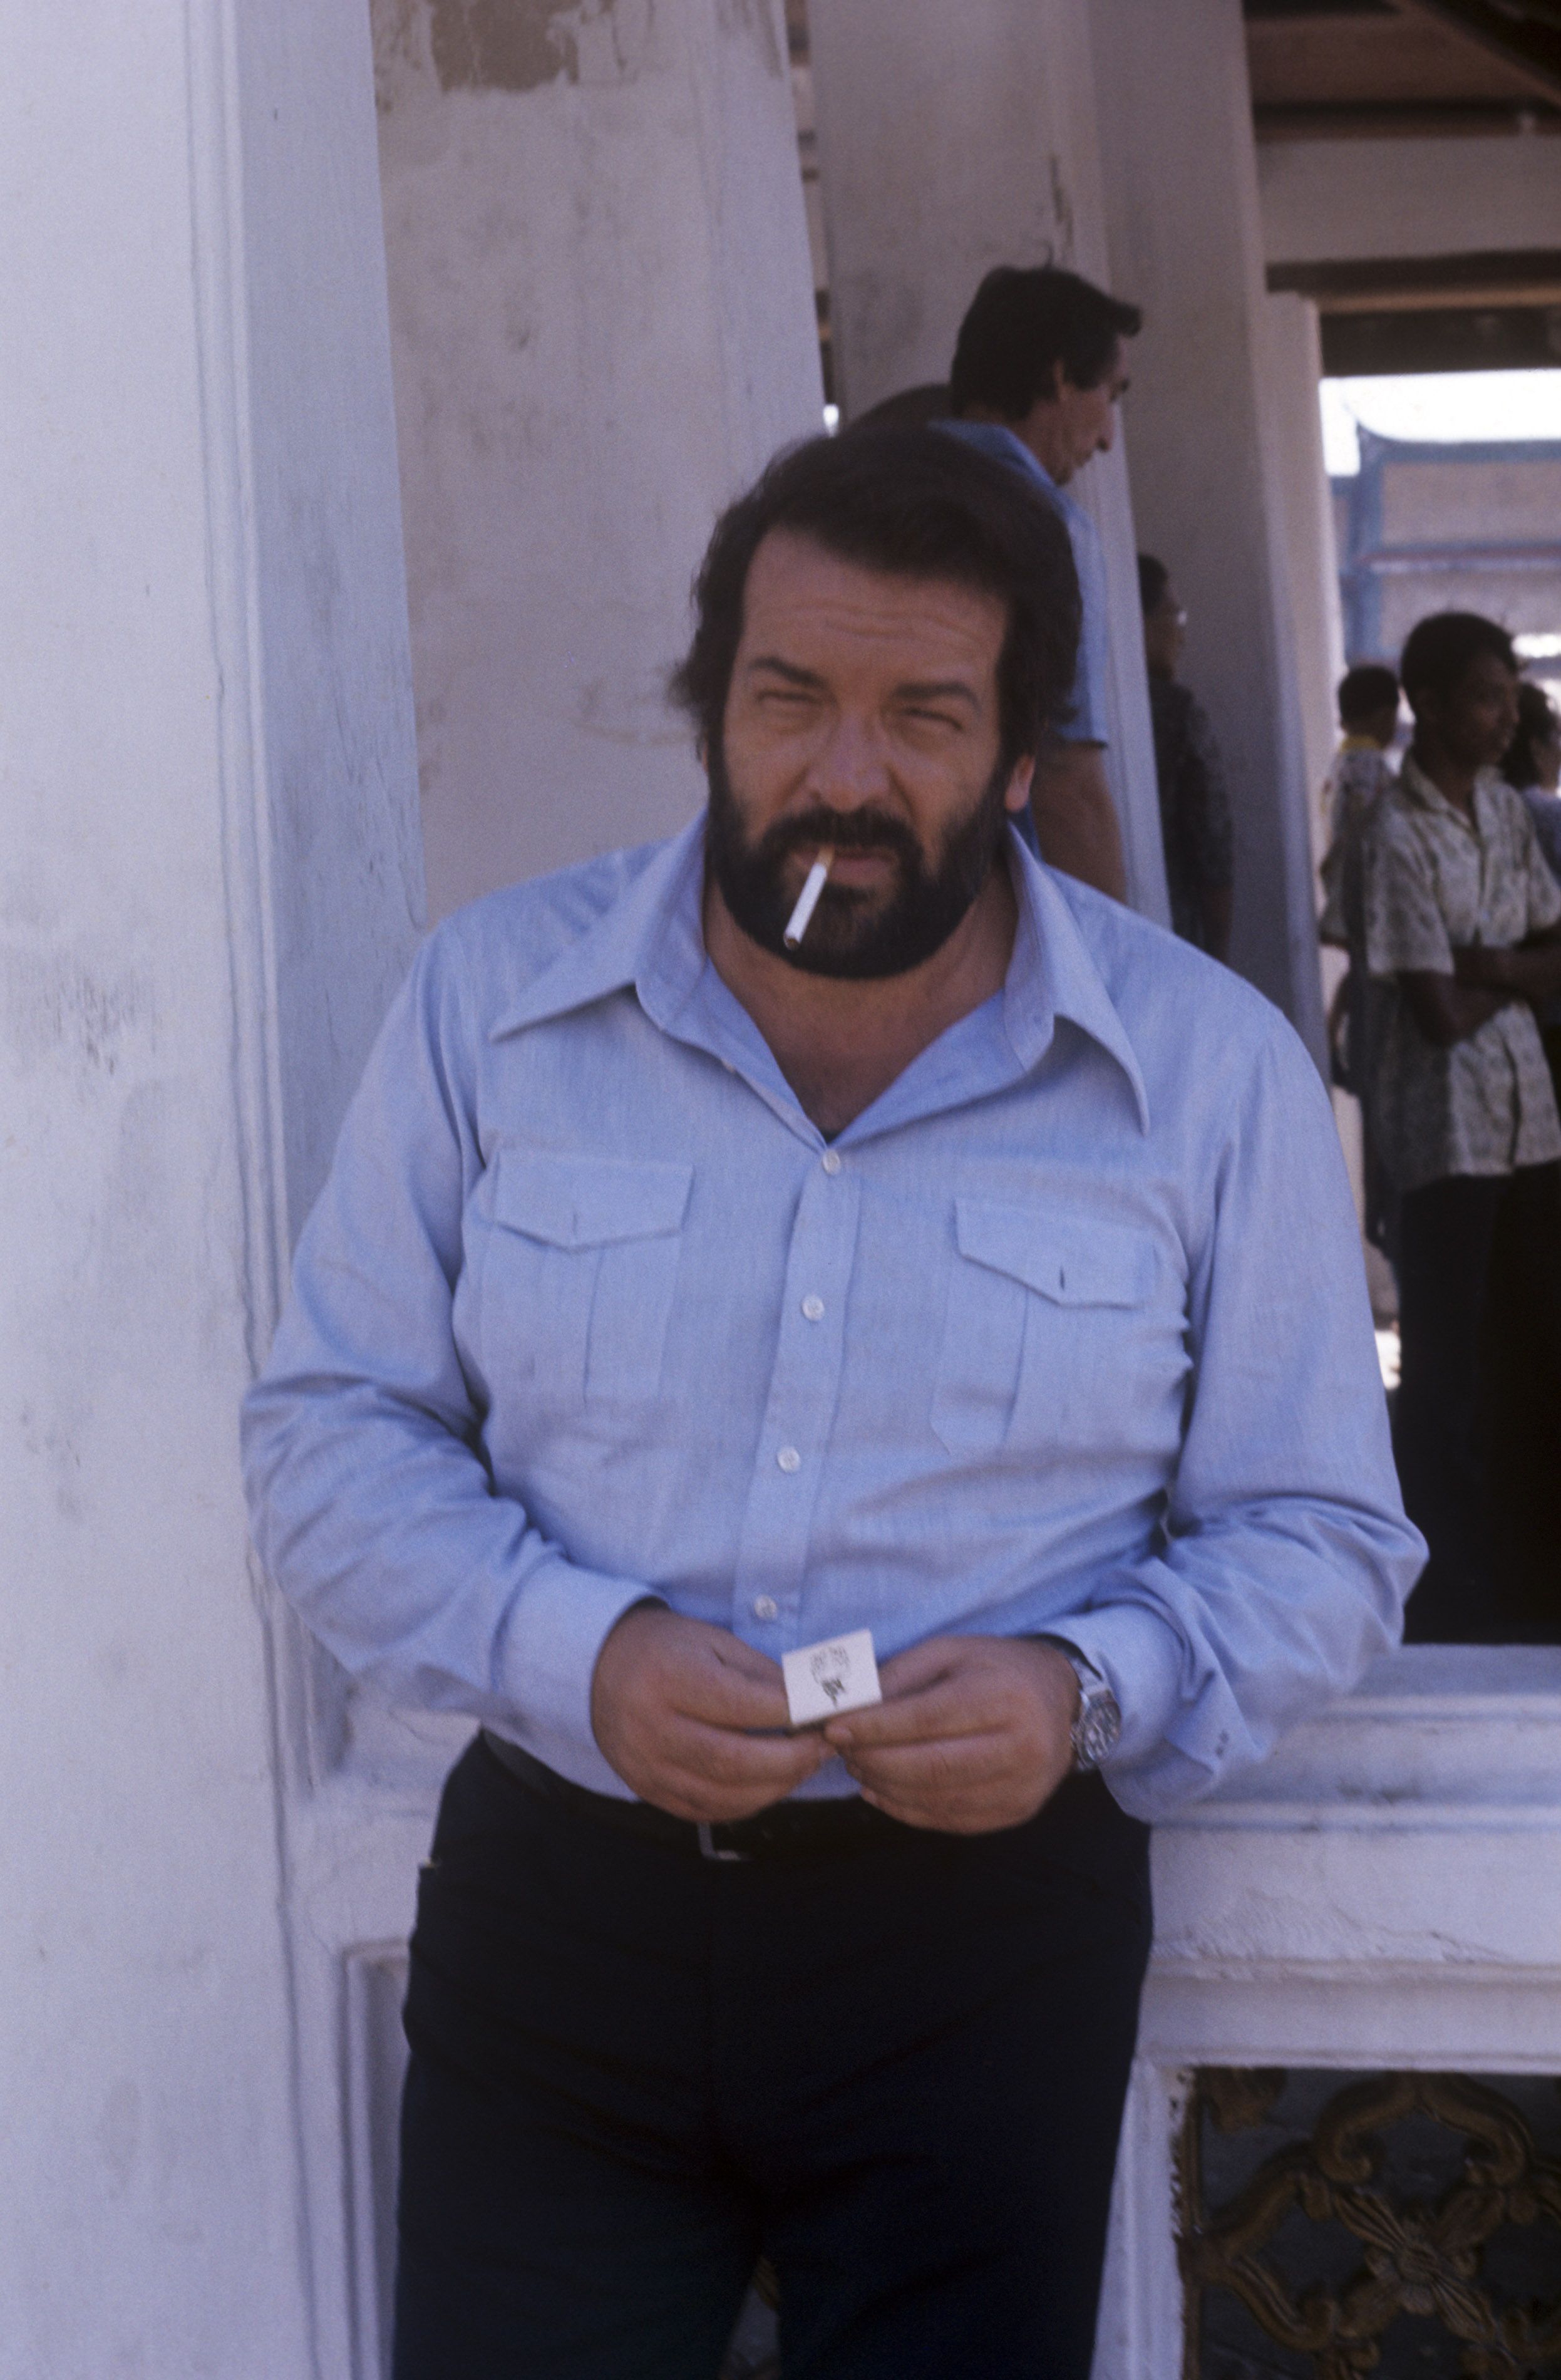 Spaghetti western star Bud Spencer dies at the age of 86